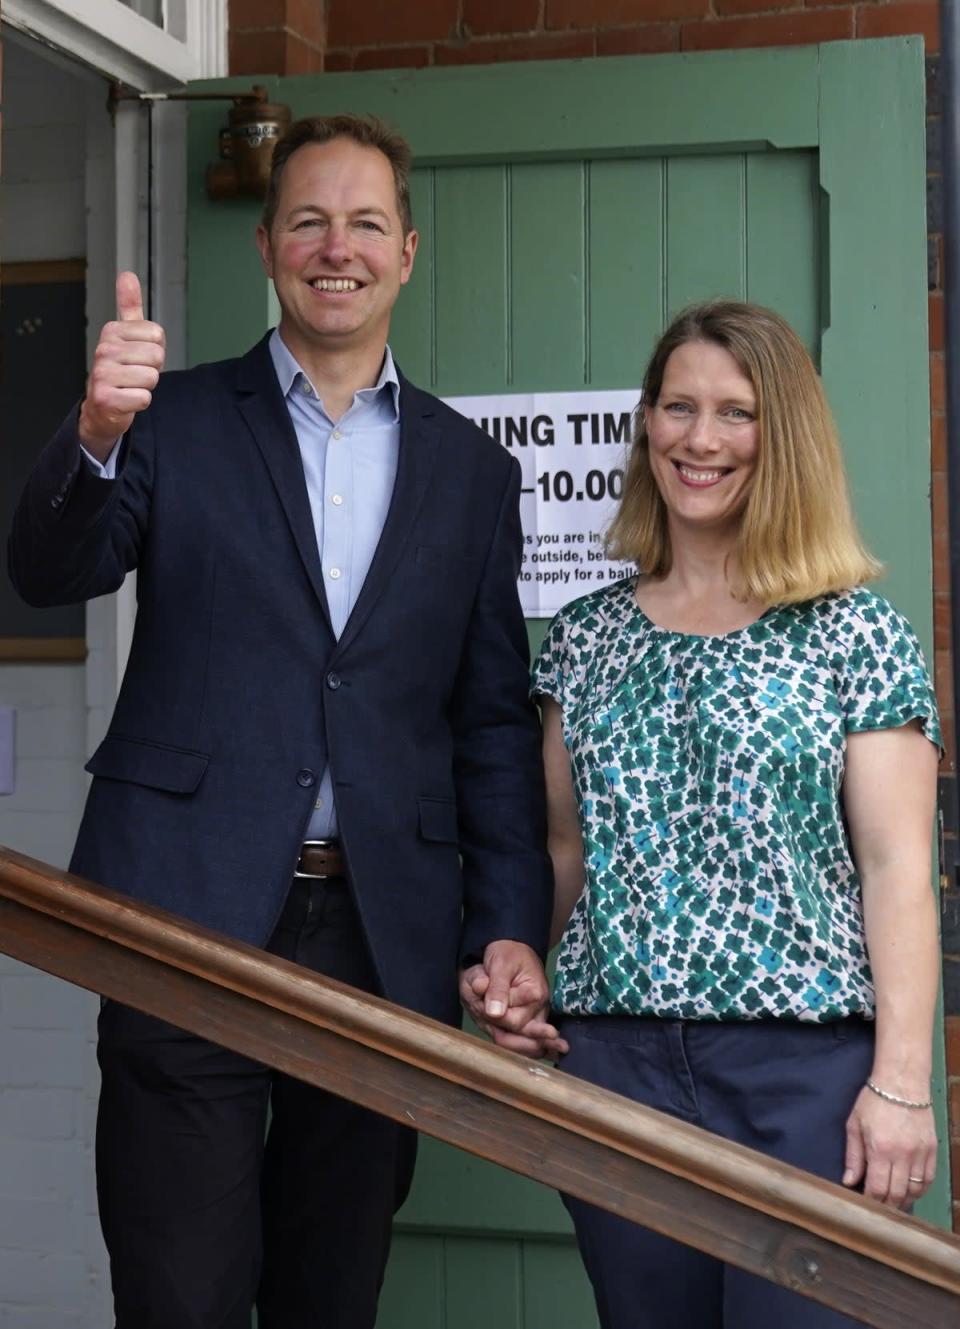 The Liberal Democrats’ by-election candidate Richard Foord (left) poses for a photograph with his wife Kate after they cast their votes (Andrew Matthews/PA) (PA Wire)